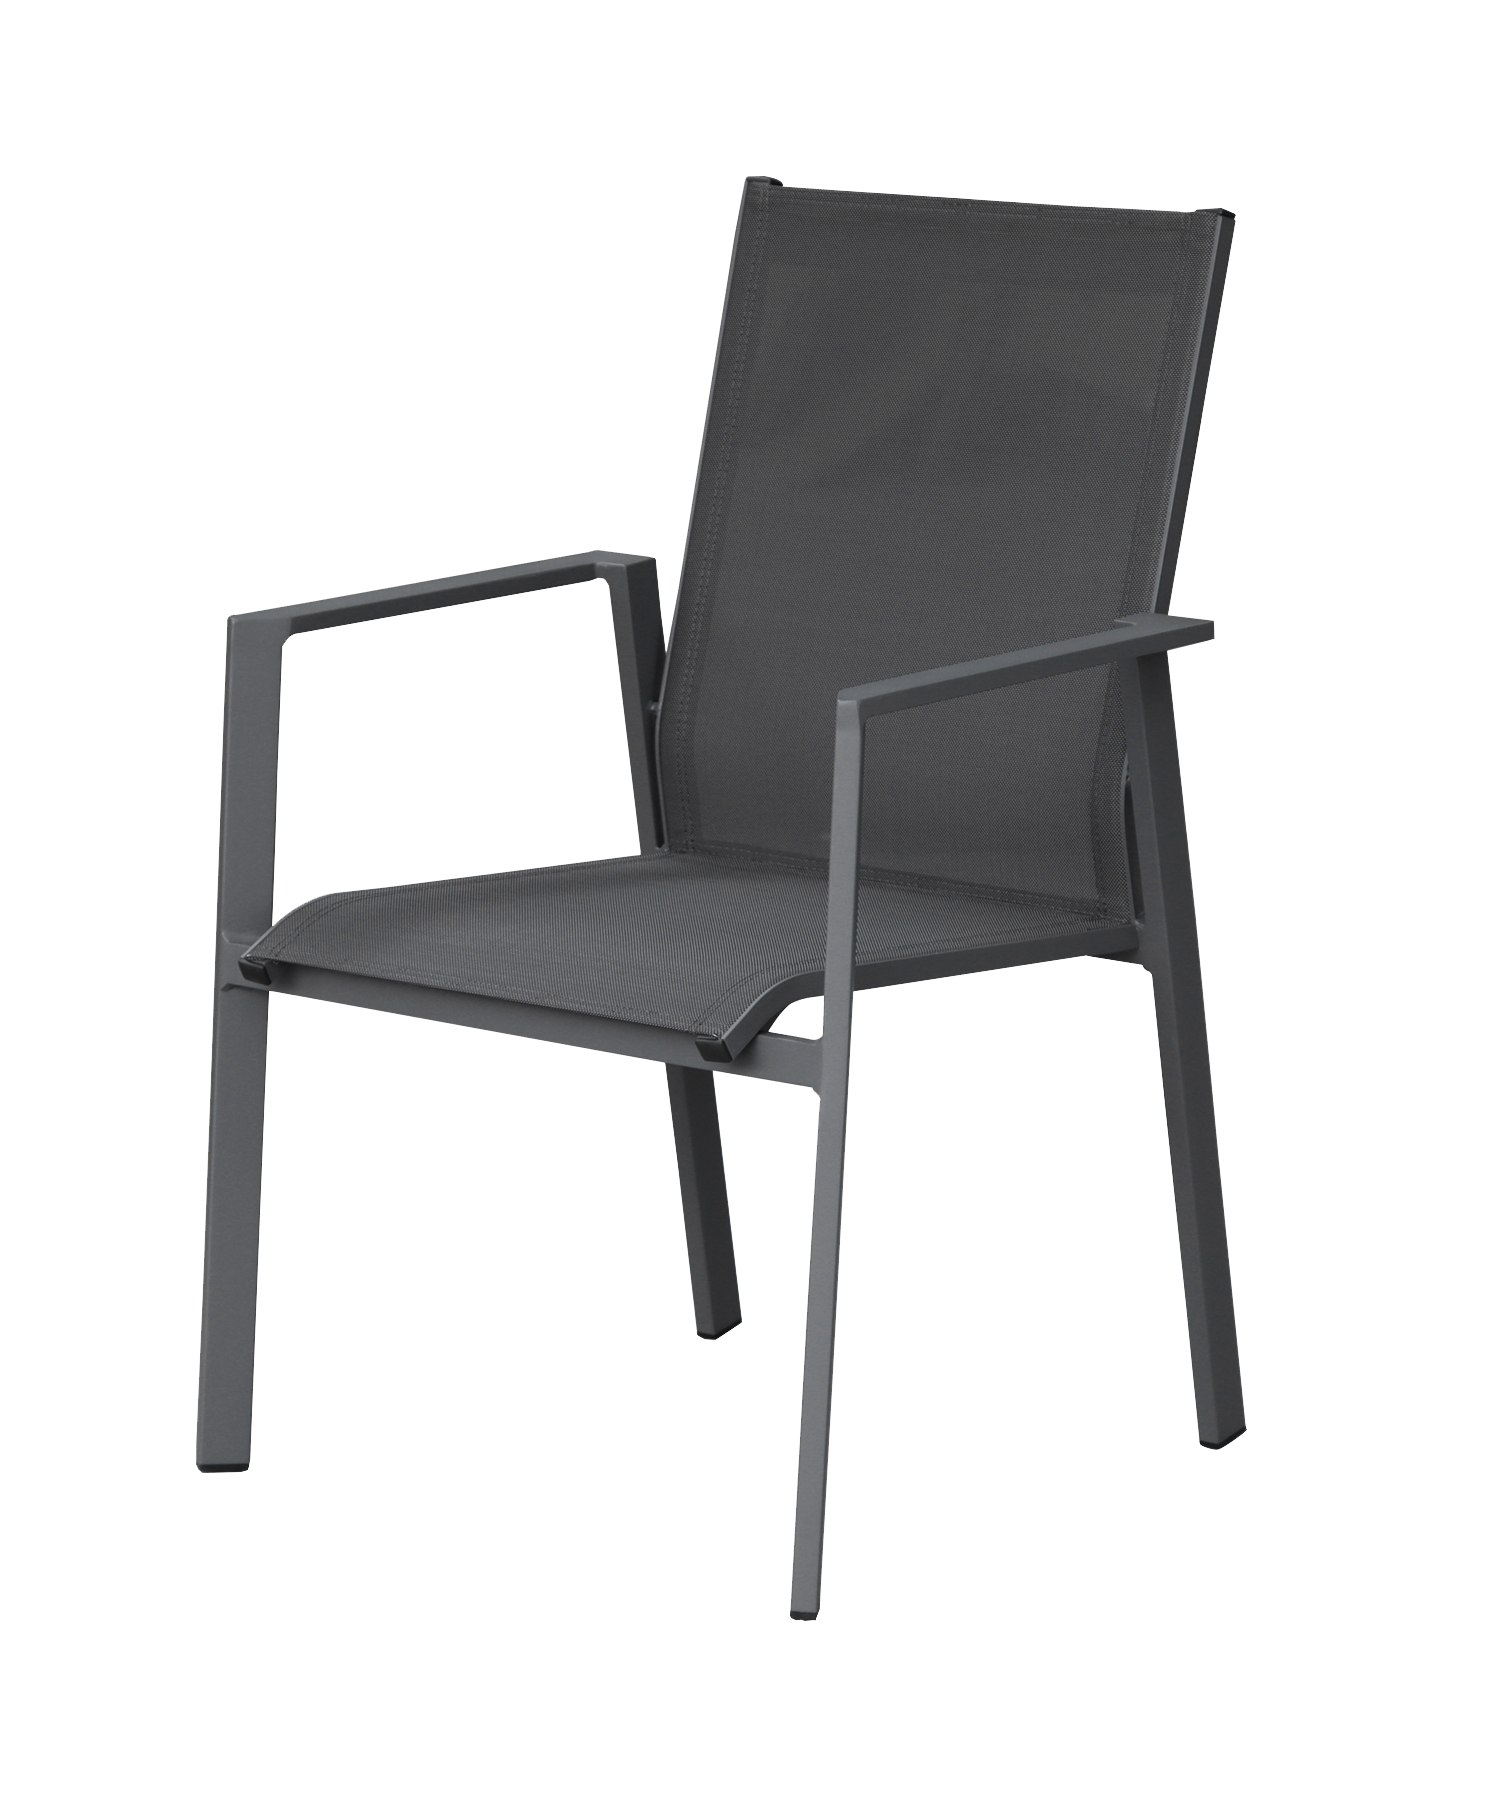 Popular mesh stackable dining chair